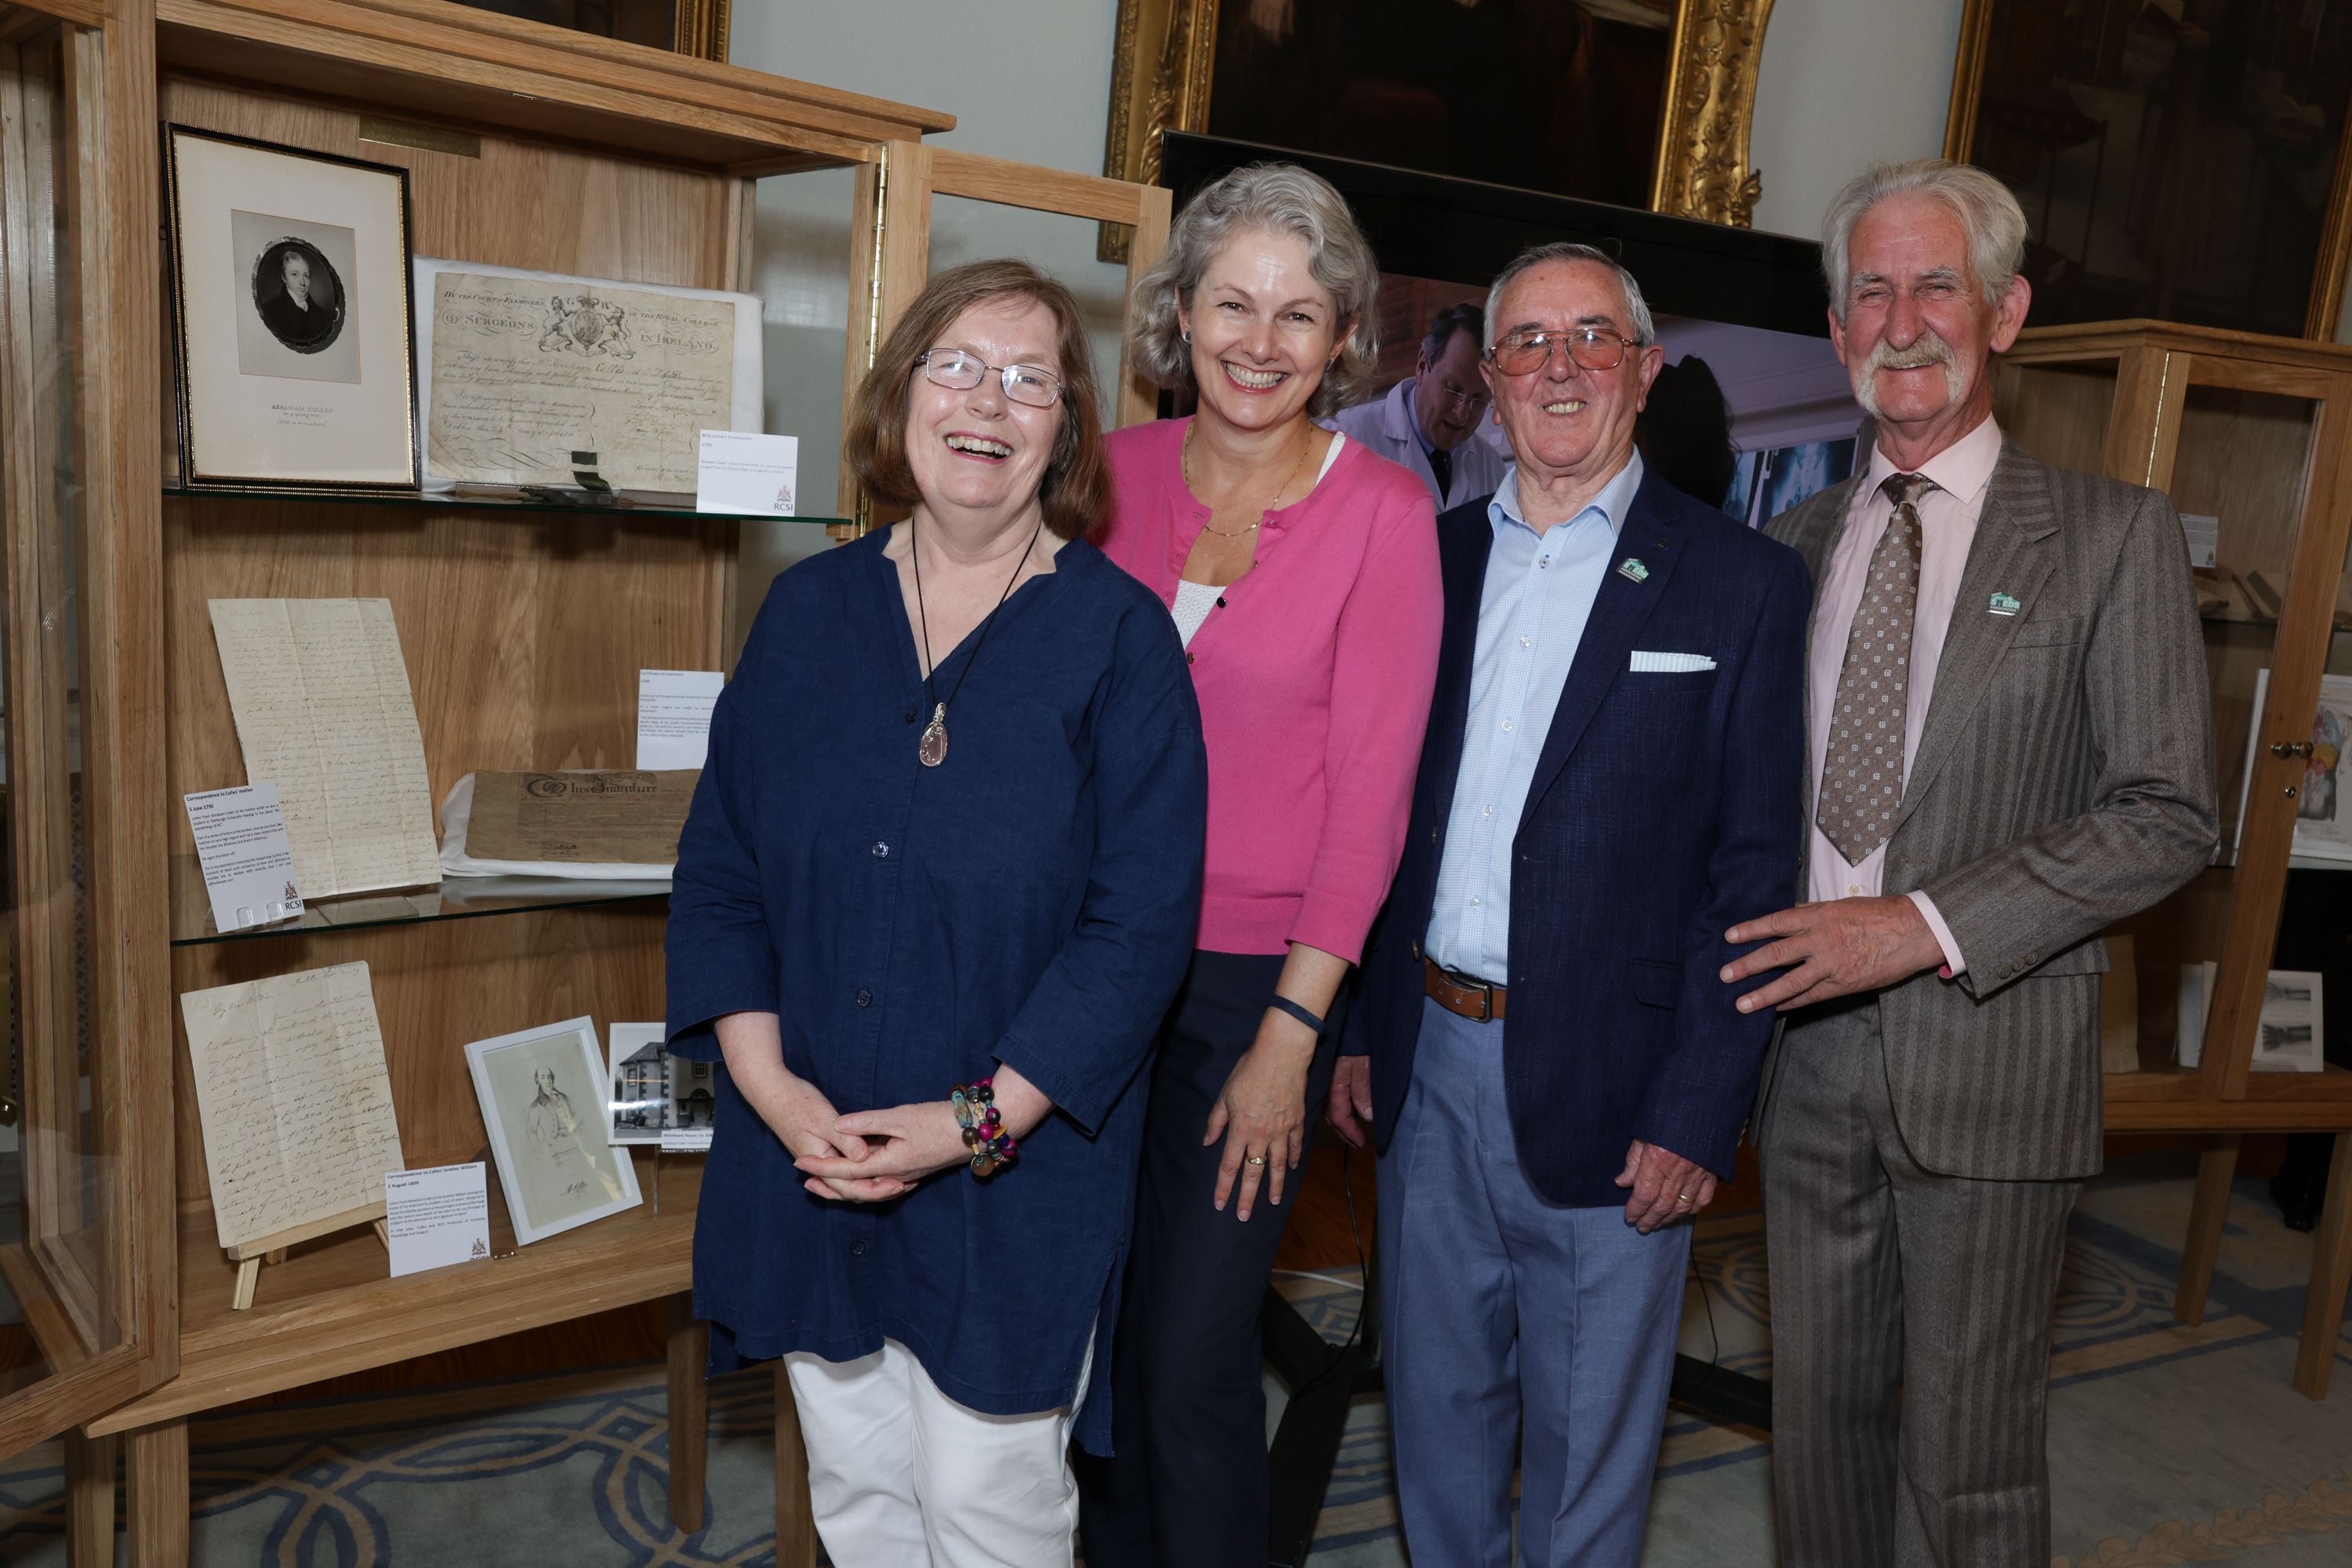 Kate Kelly and Liz Hughes (RCSI) with members of Clondalkin Men's Shed at the Colles at 250 exhibition.